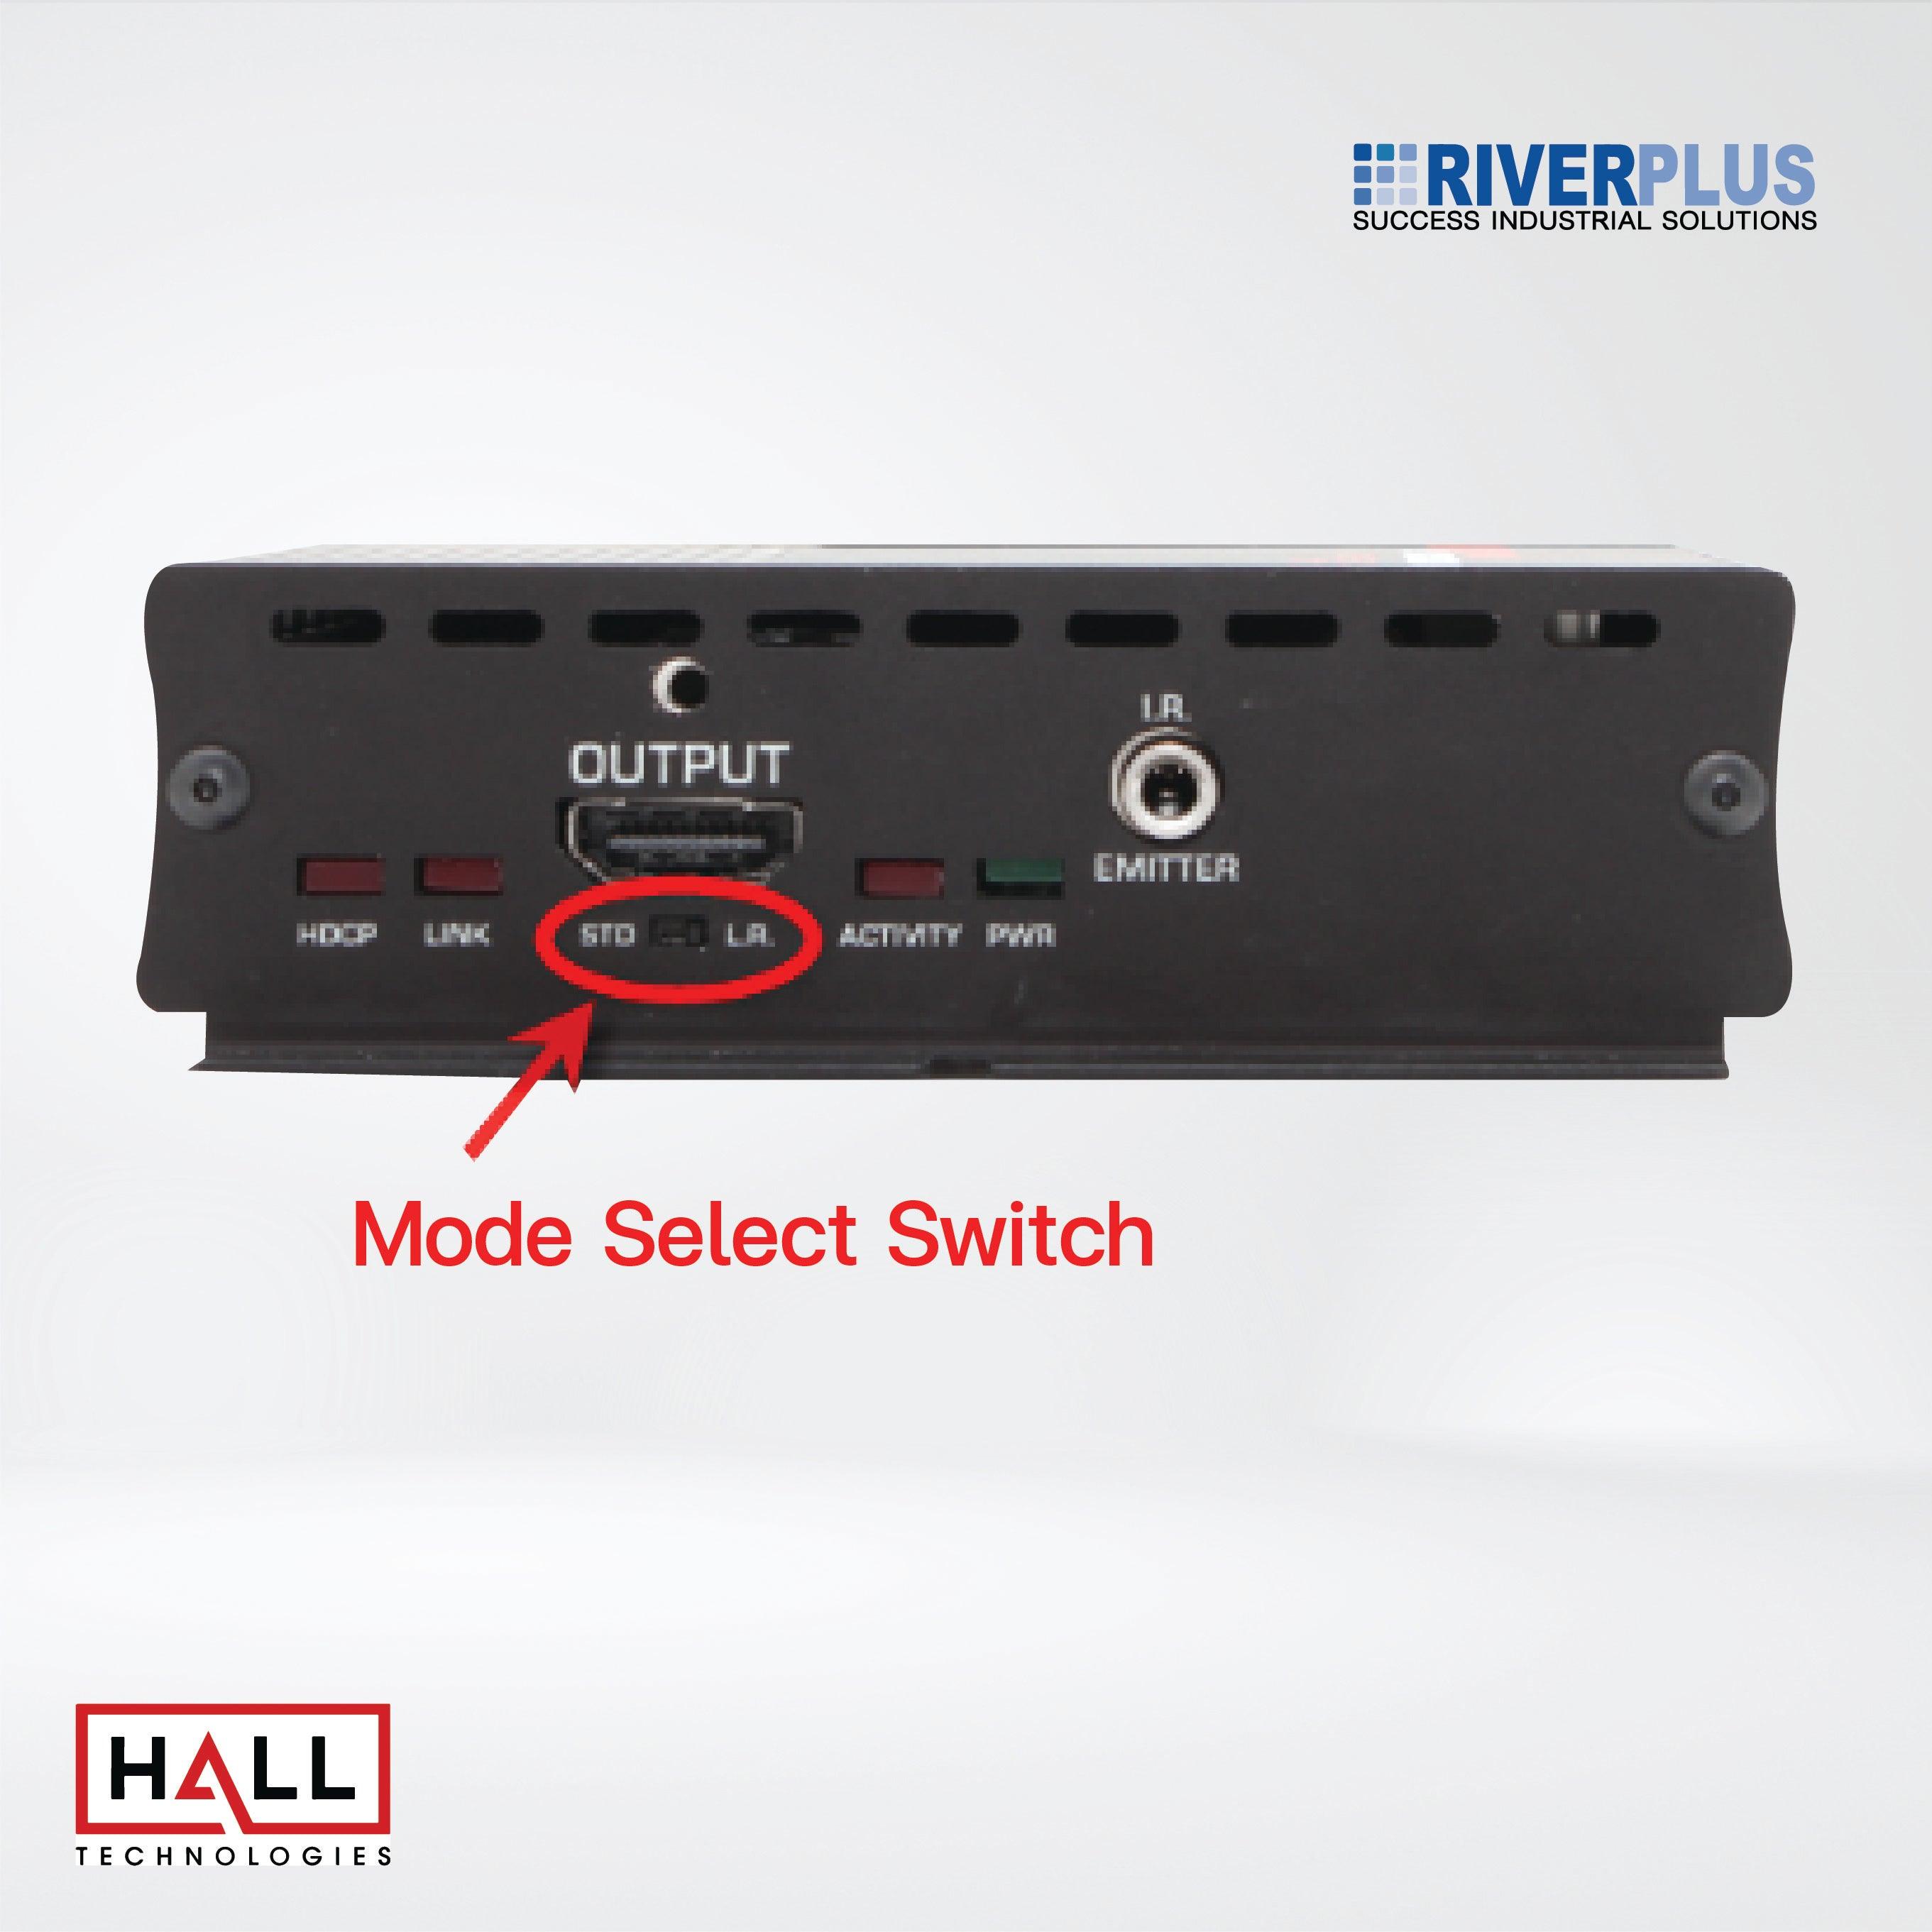 UHBX-WP-P2 HDMI over UTP Extender with HDBaseT™ and PoH ( Wall Plate Sender + Receiver ) - Riverplus